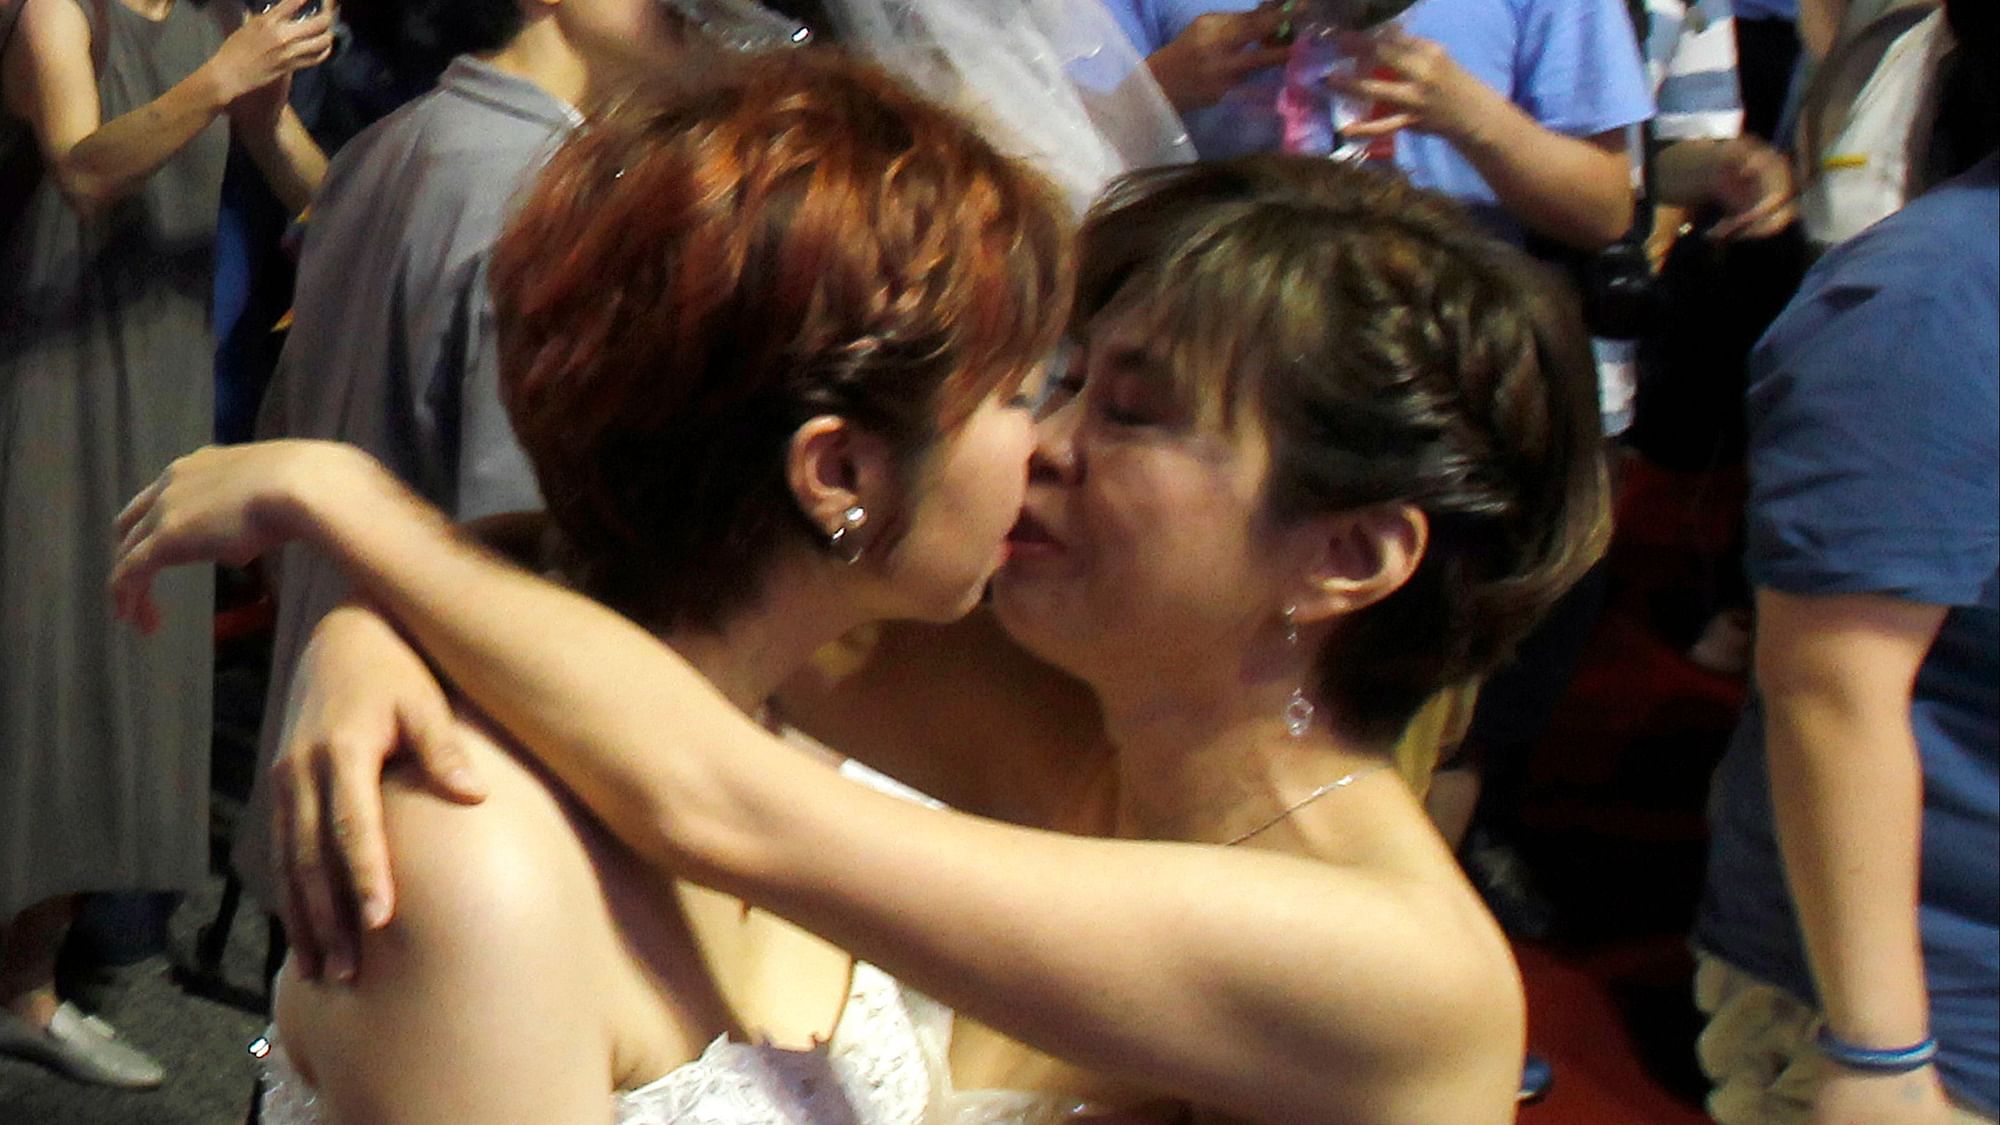 A gay couple kisses after tying the knot